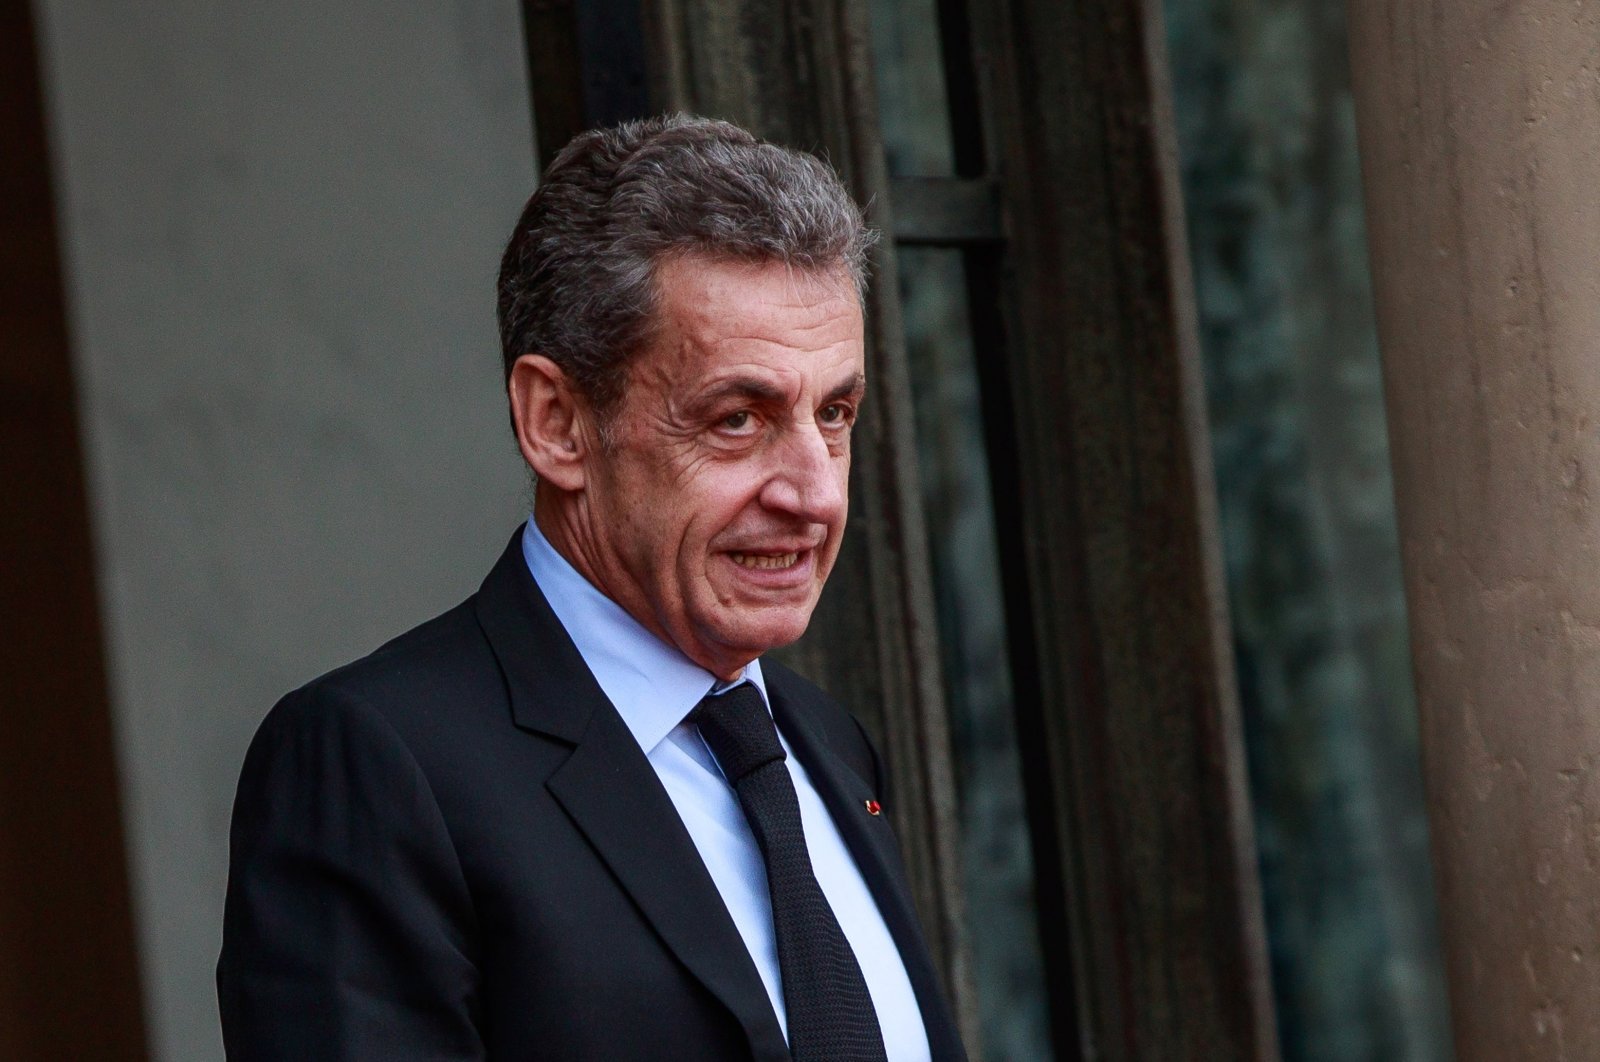 Former French president Nicolas Sarkozy leaves Elysee palace following a memorial for French former President Jacques Chirac, at the Elysee Palace in Paris, France, Sept. 30, 2019. (EPA Photo)